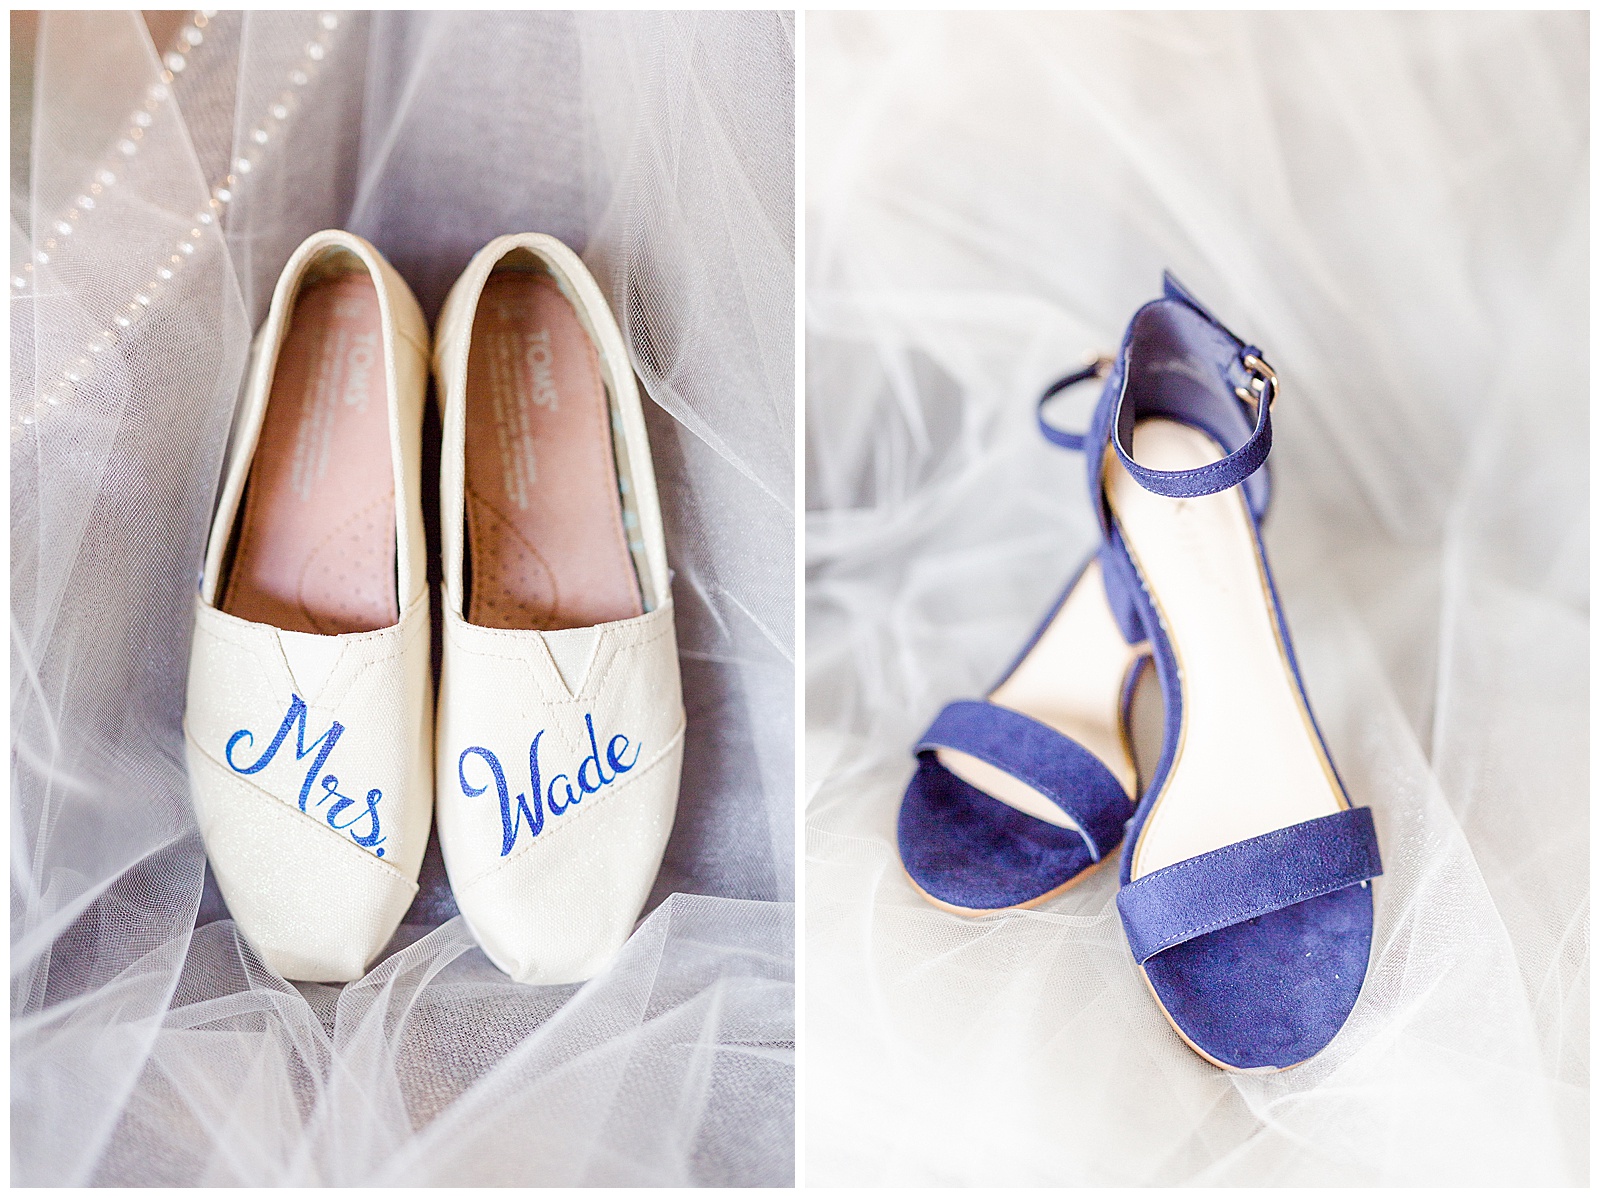 Dark Blue Strappy High Heels and Personalized Toms from Elegant Modern Red and Navy Blue Themed Wedding in Charlotte, NC | check out the full wedding at KevynDixonPhoto.com